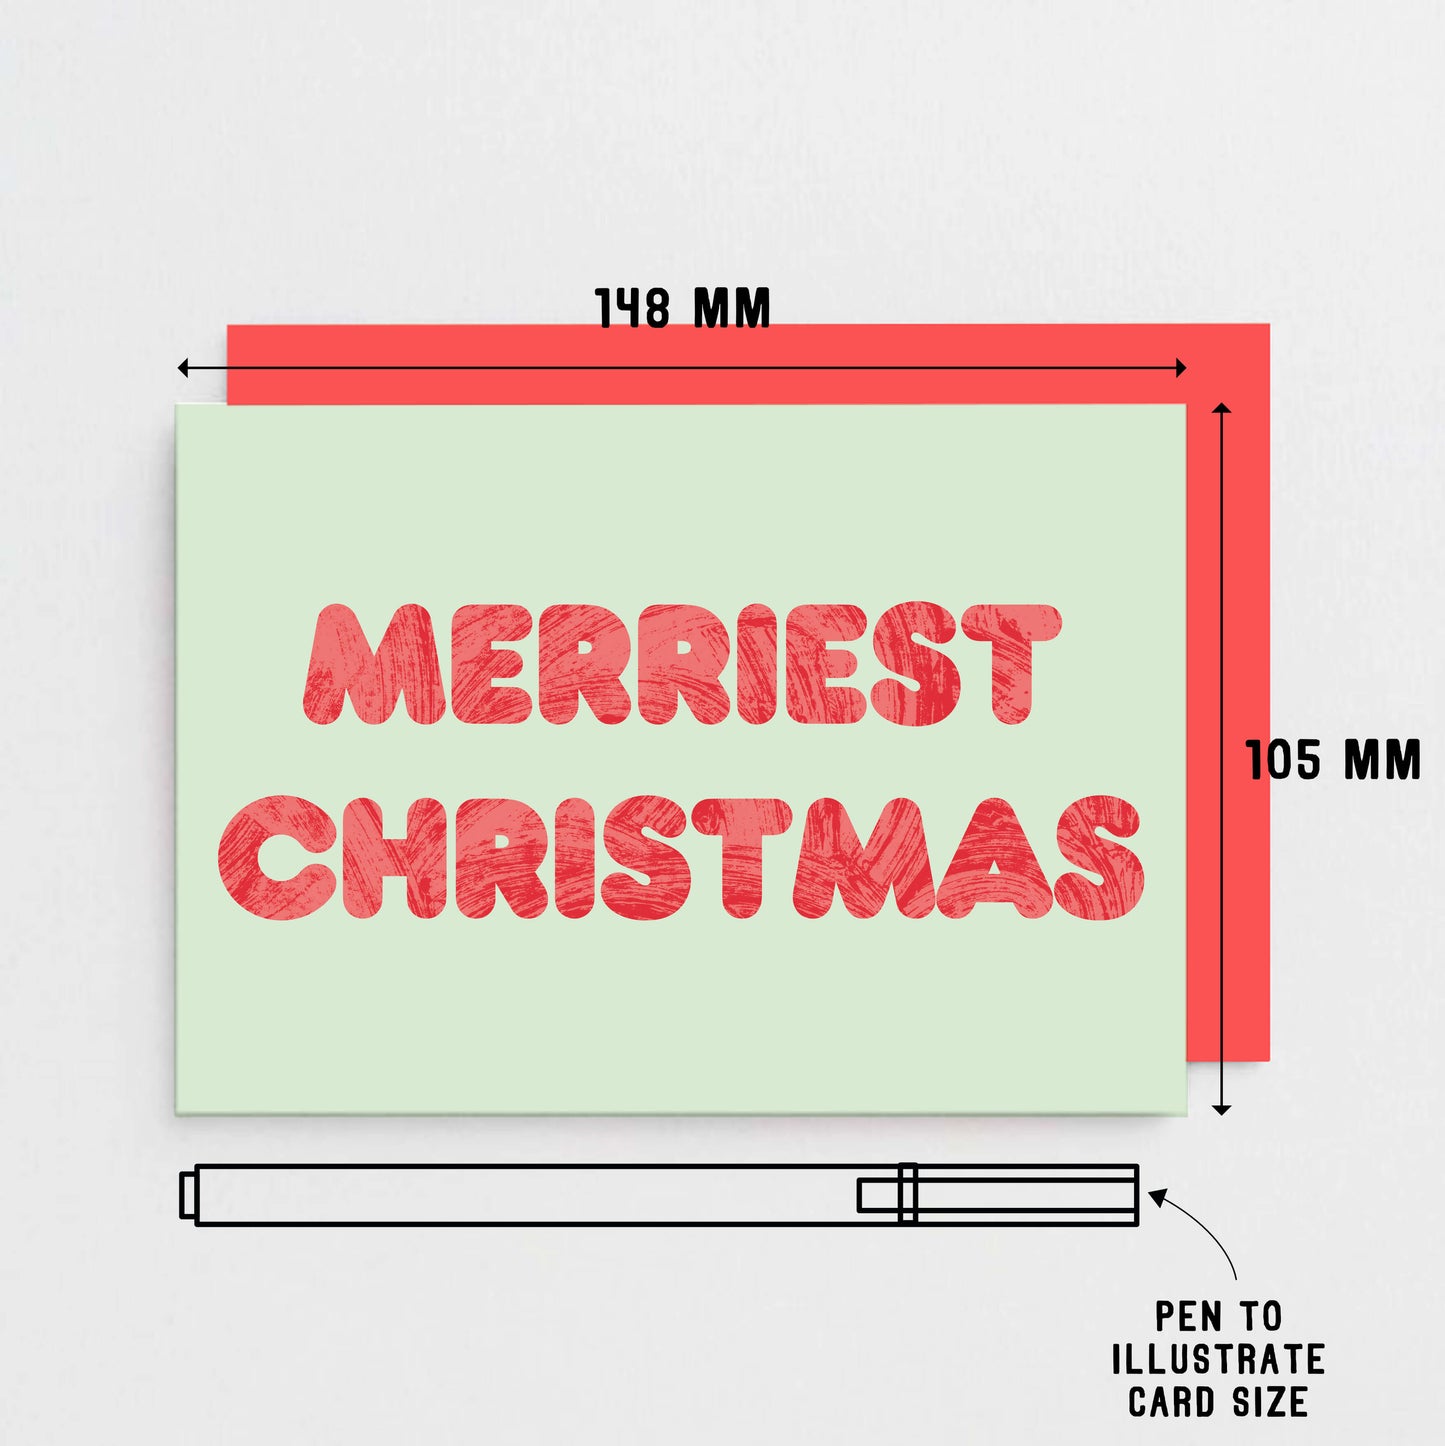 Merriest Christmas Card by SixElevenCreations. Product Code SEC0101A6